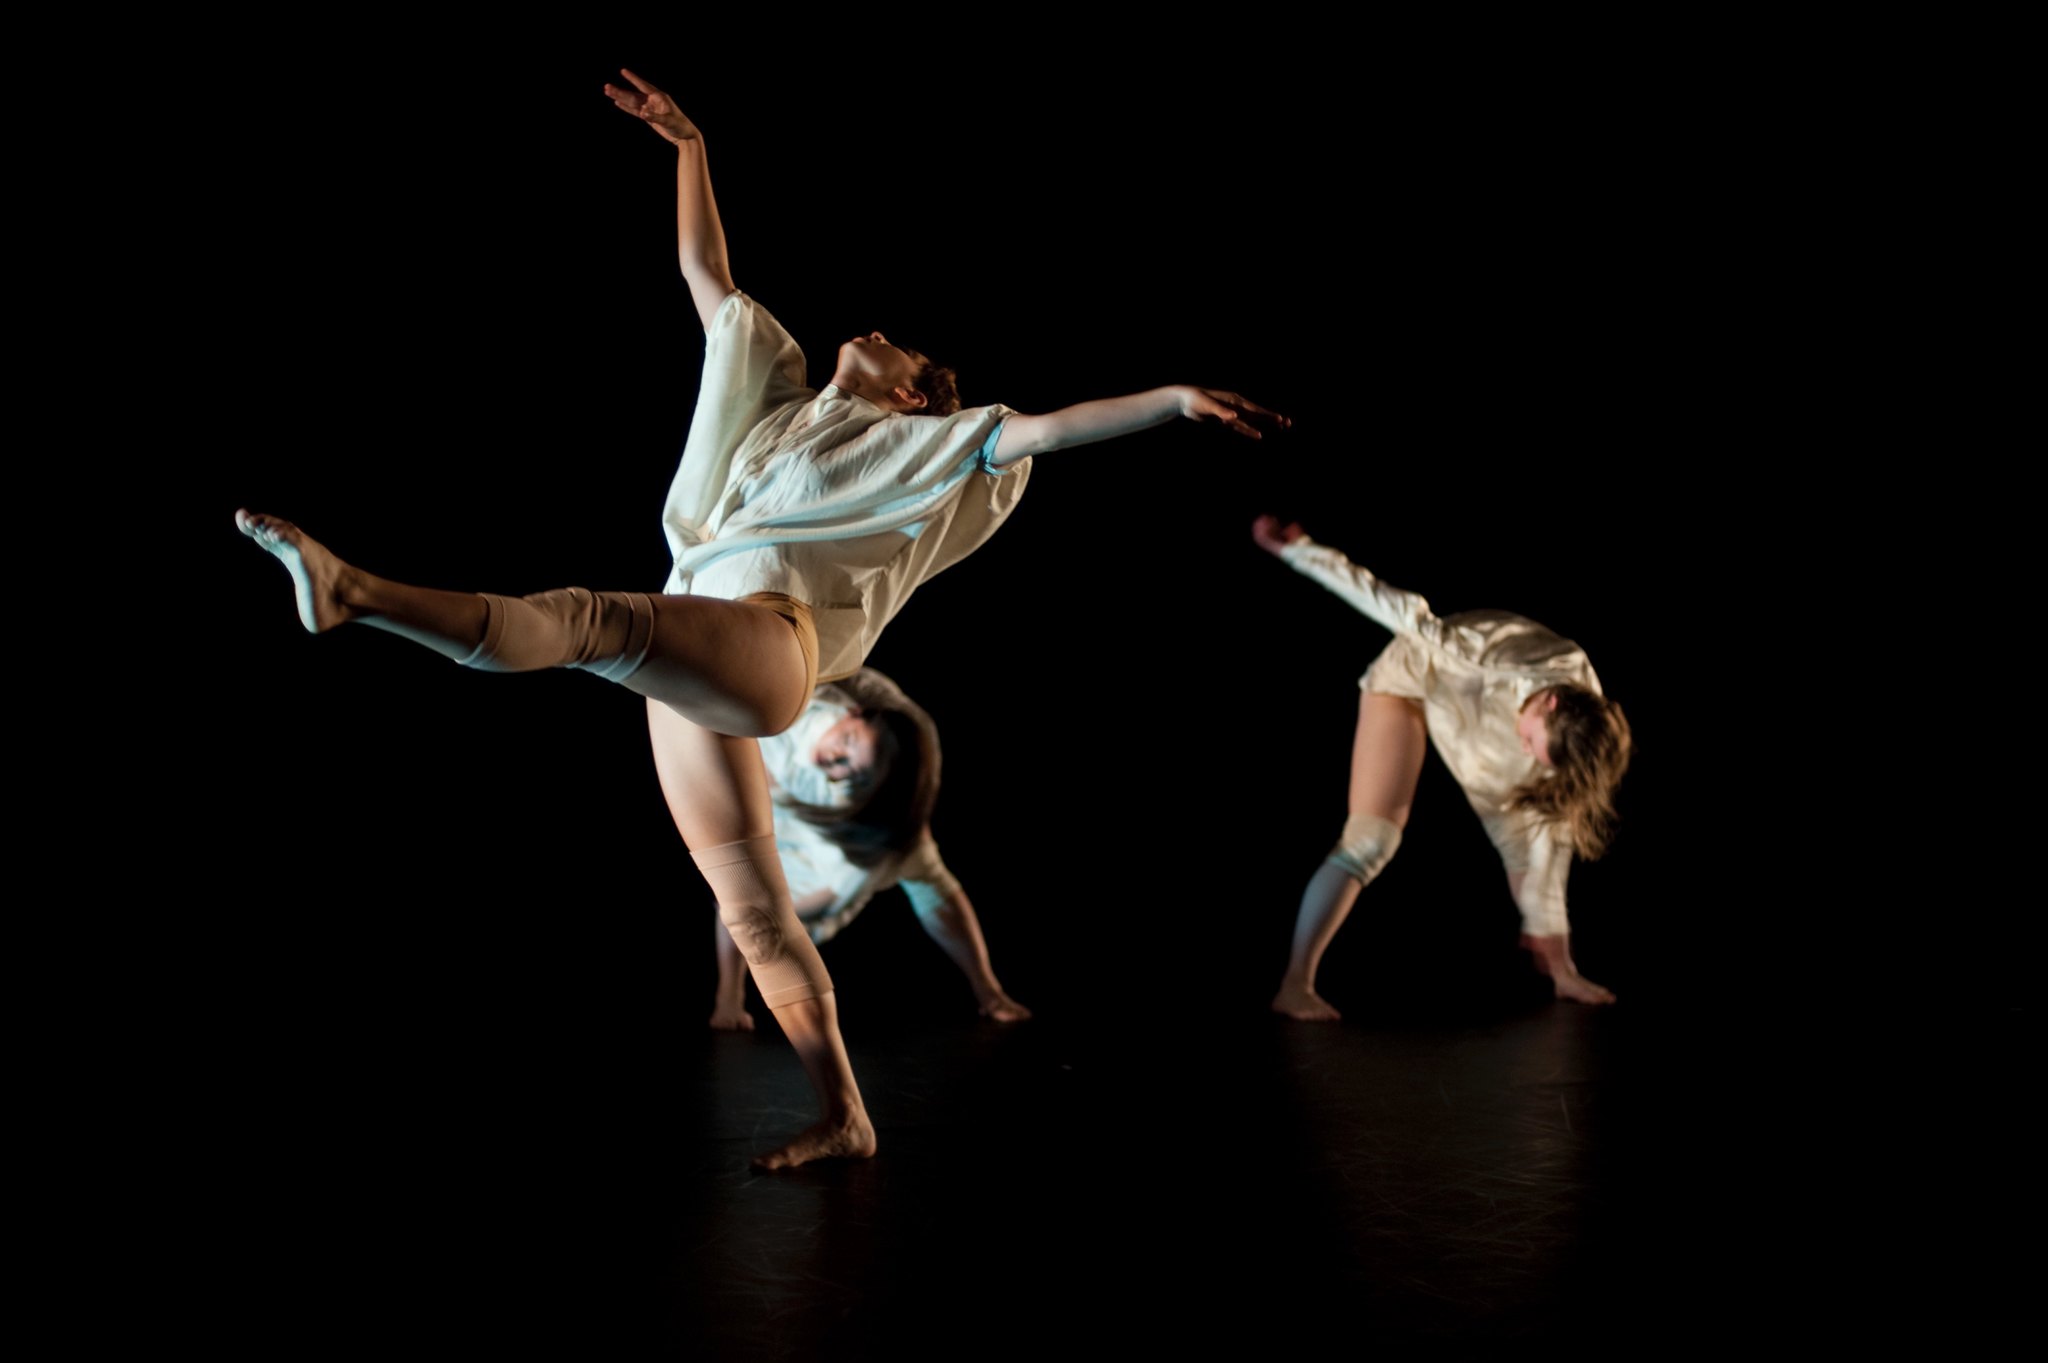 Three performers dance on stage against a dark background